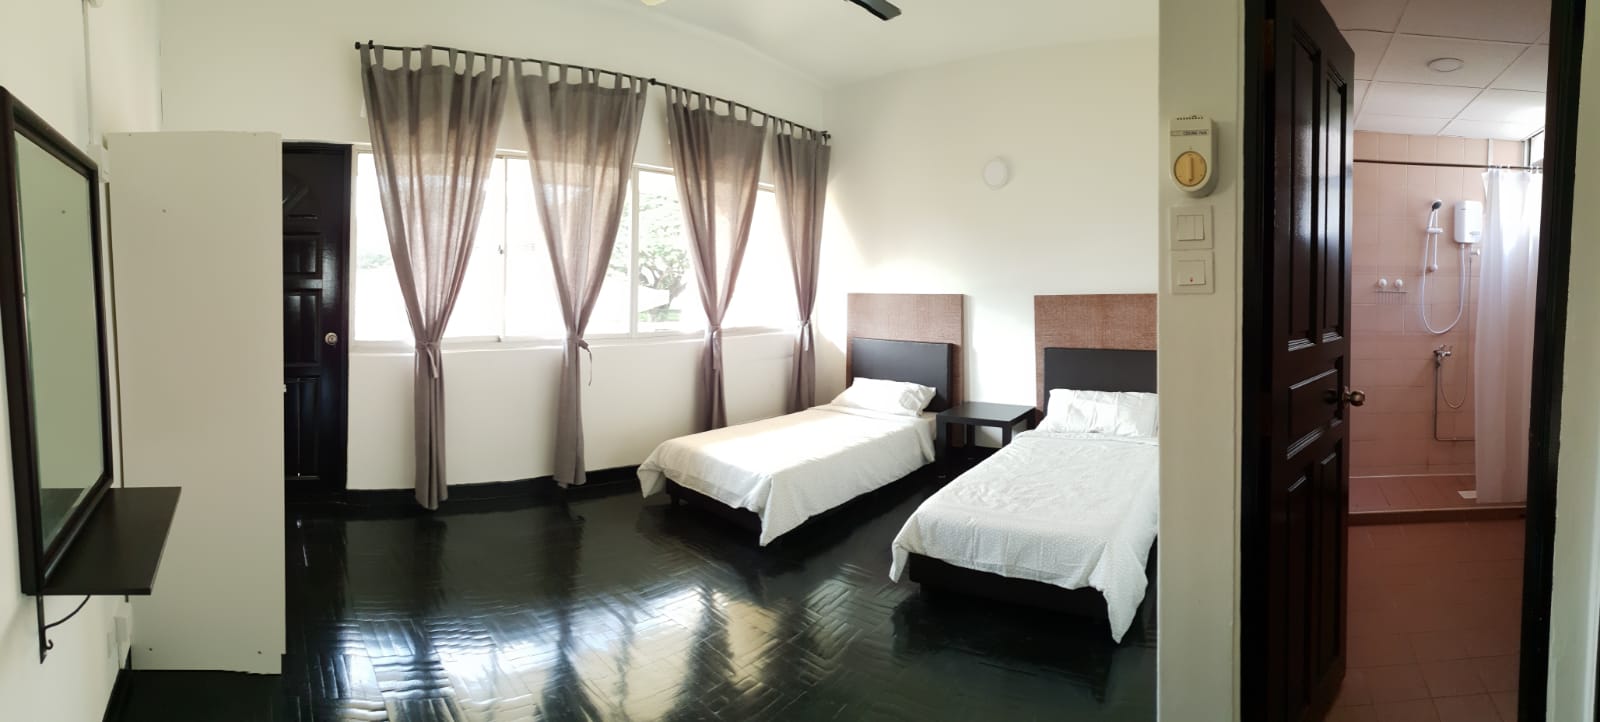 Chalets in Singapore - Heritage Chalet rooms